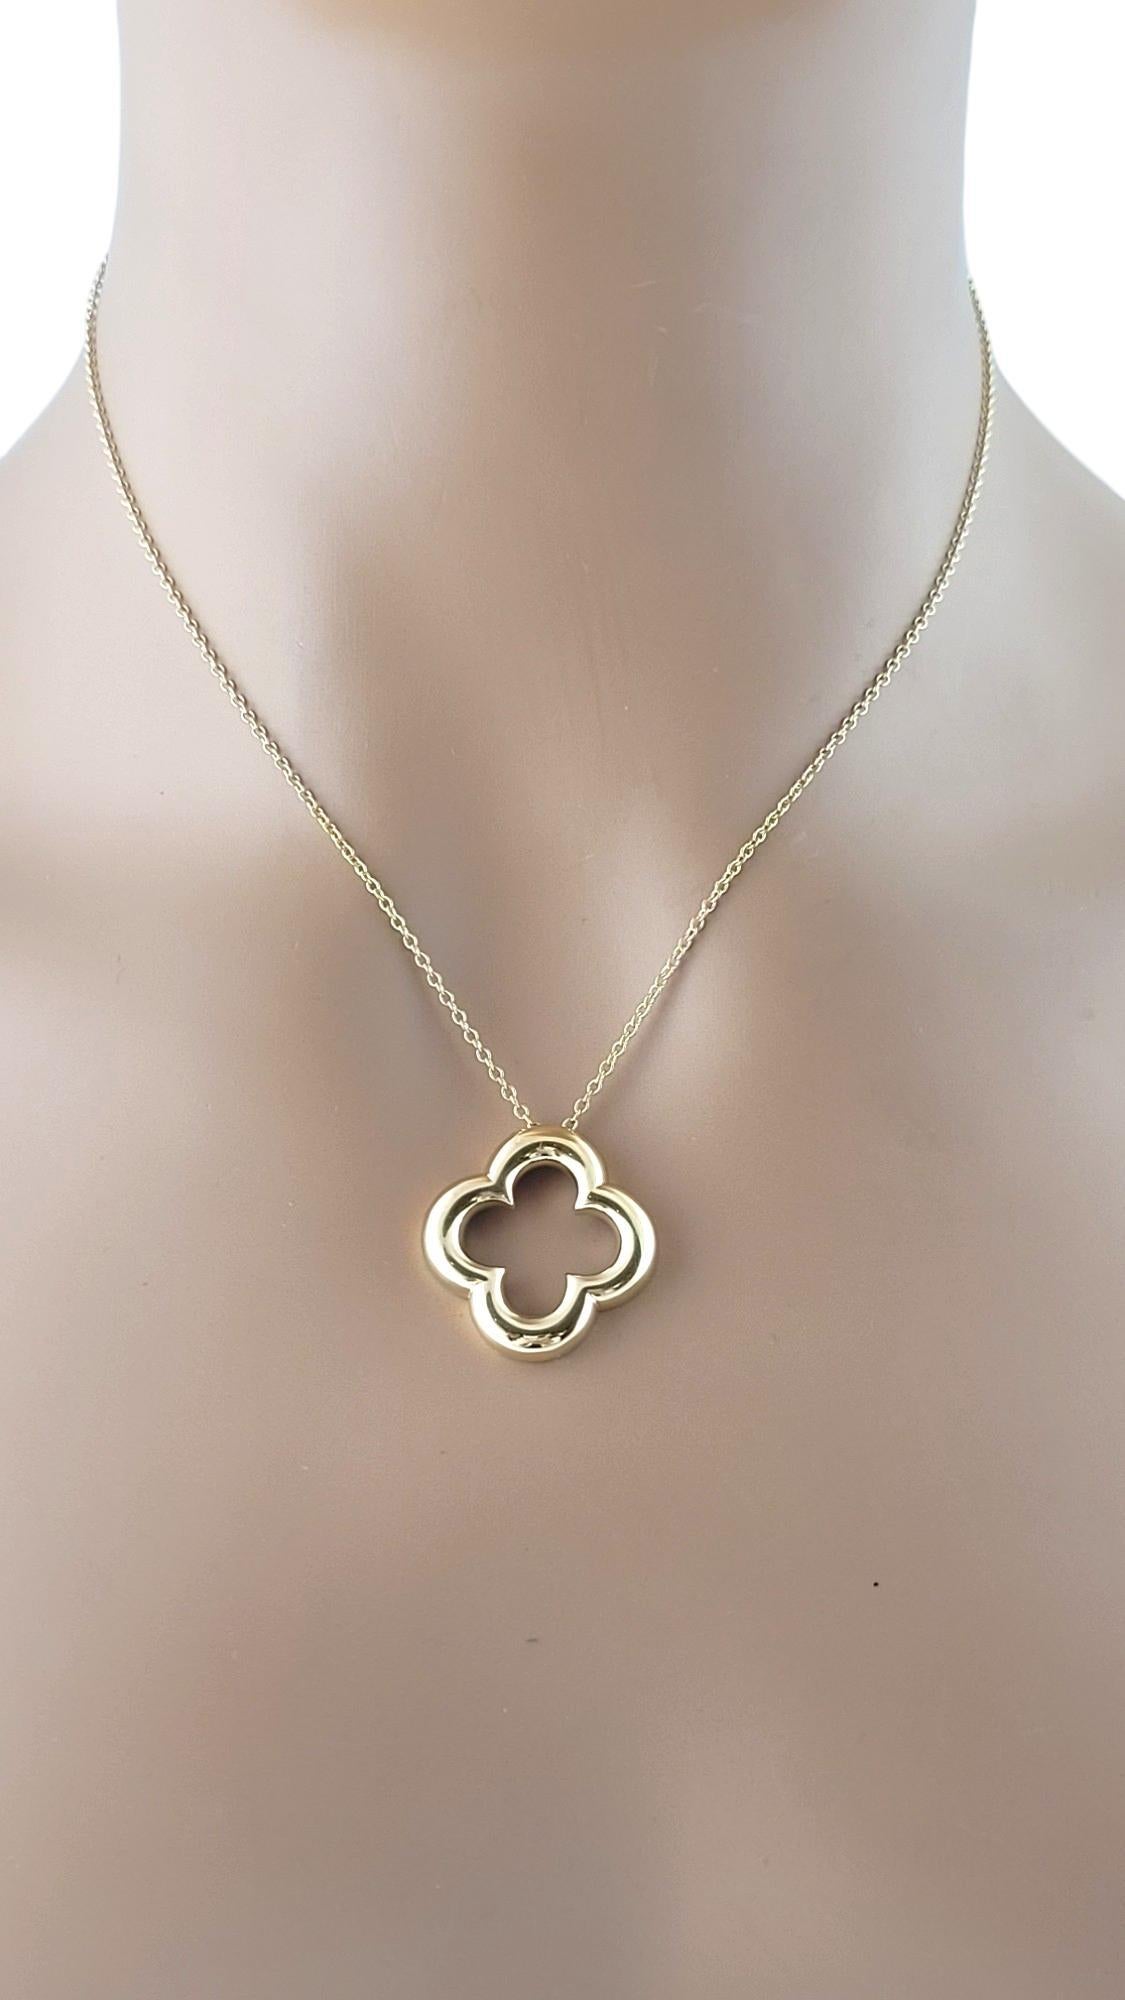 18K Yellow Gold Jean Vitale Clover Necklace #17399 For Sale 4